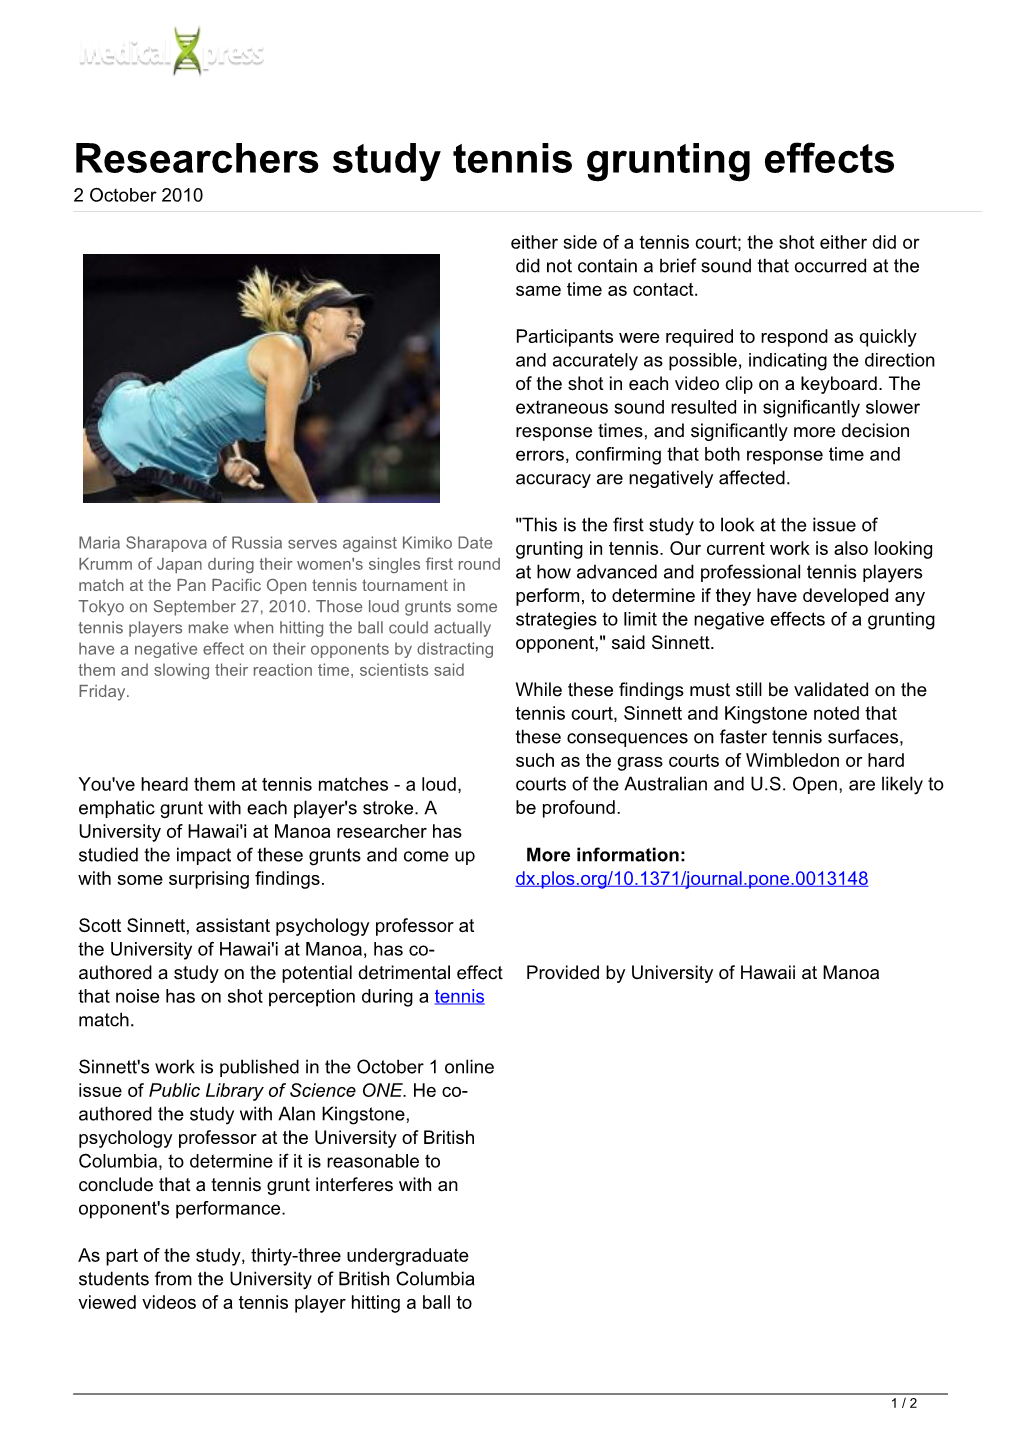 Researchers Study Tennis Grunting Effects 2 October 2010